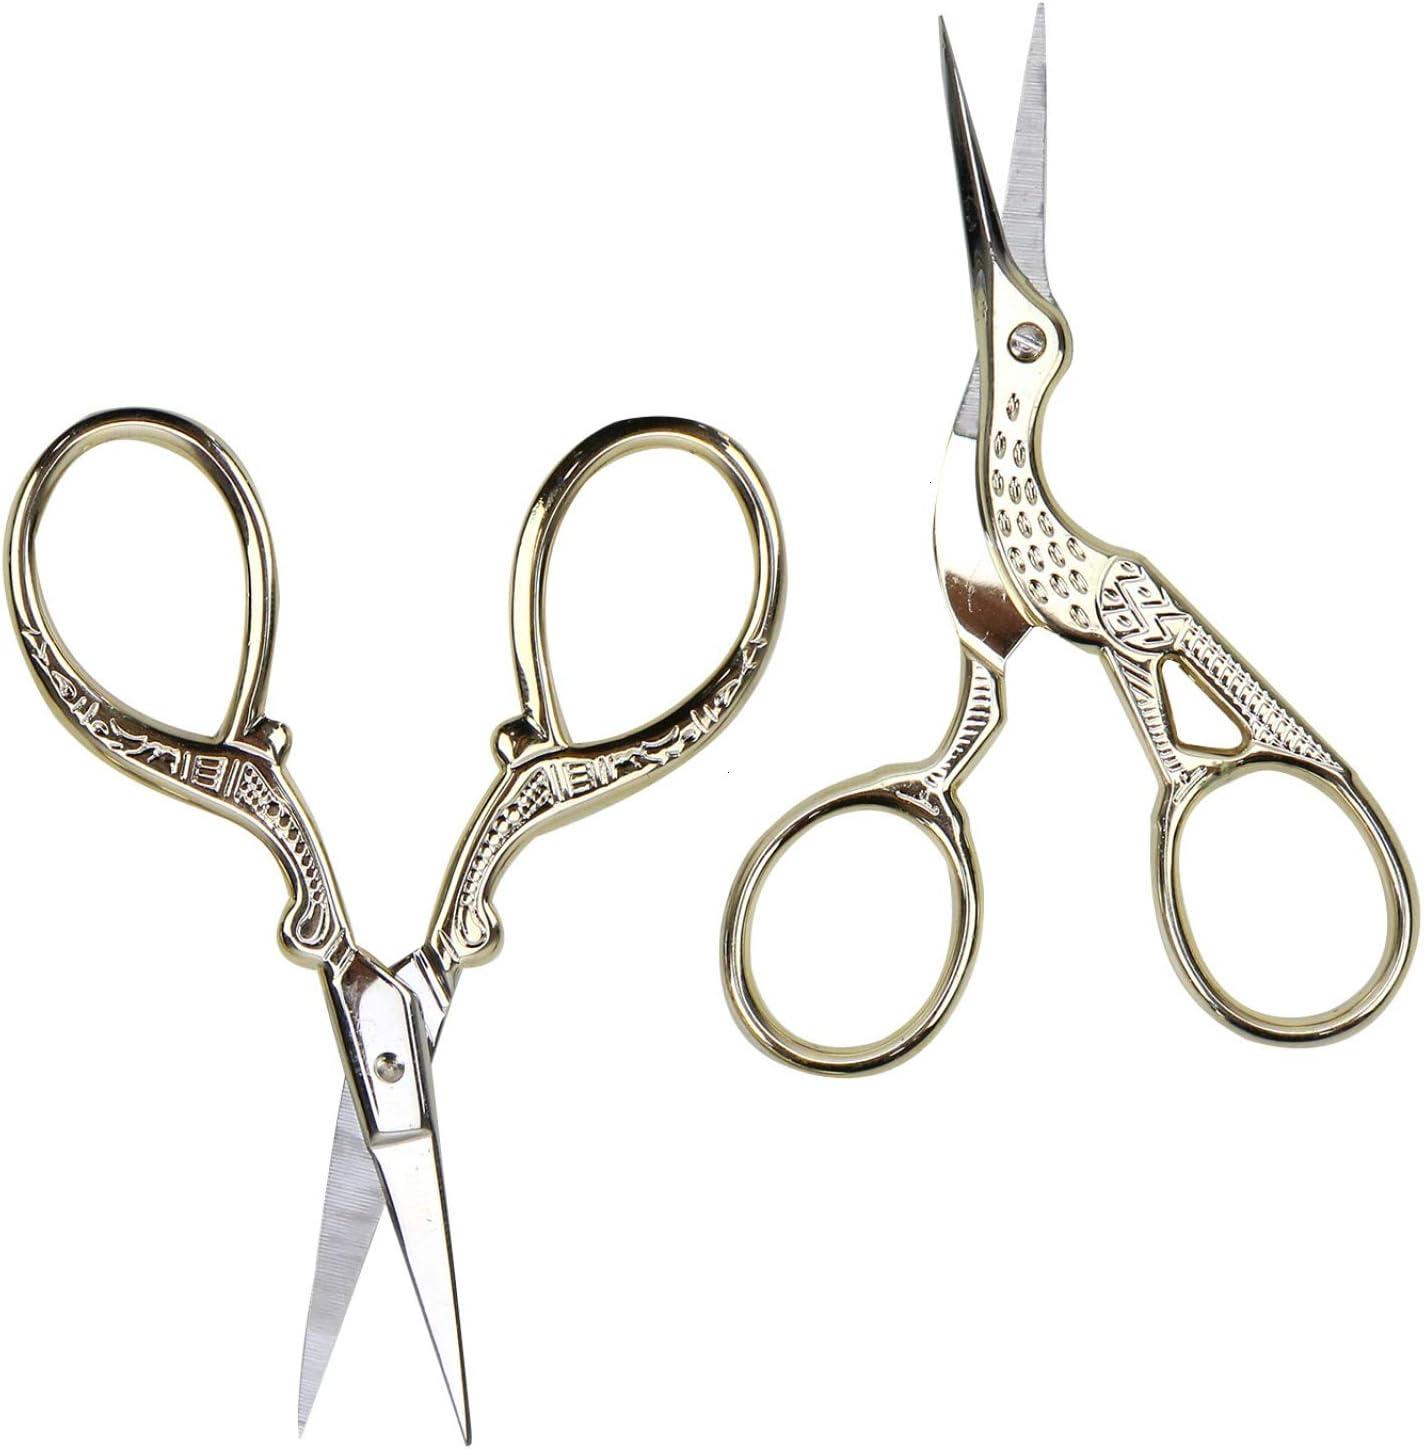 AQUEENLY Embroidery Scissors, Stainless Steel Sharp Stork Scissors for  Sewing Crafting, Art Work, Threading, Needlework - DIY Tools Dressmaker  Small Shears - 2 Pcs ( 3.6 Inches, Gold)